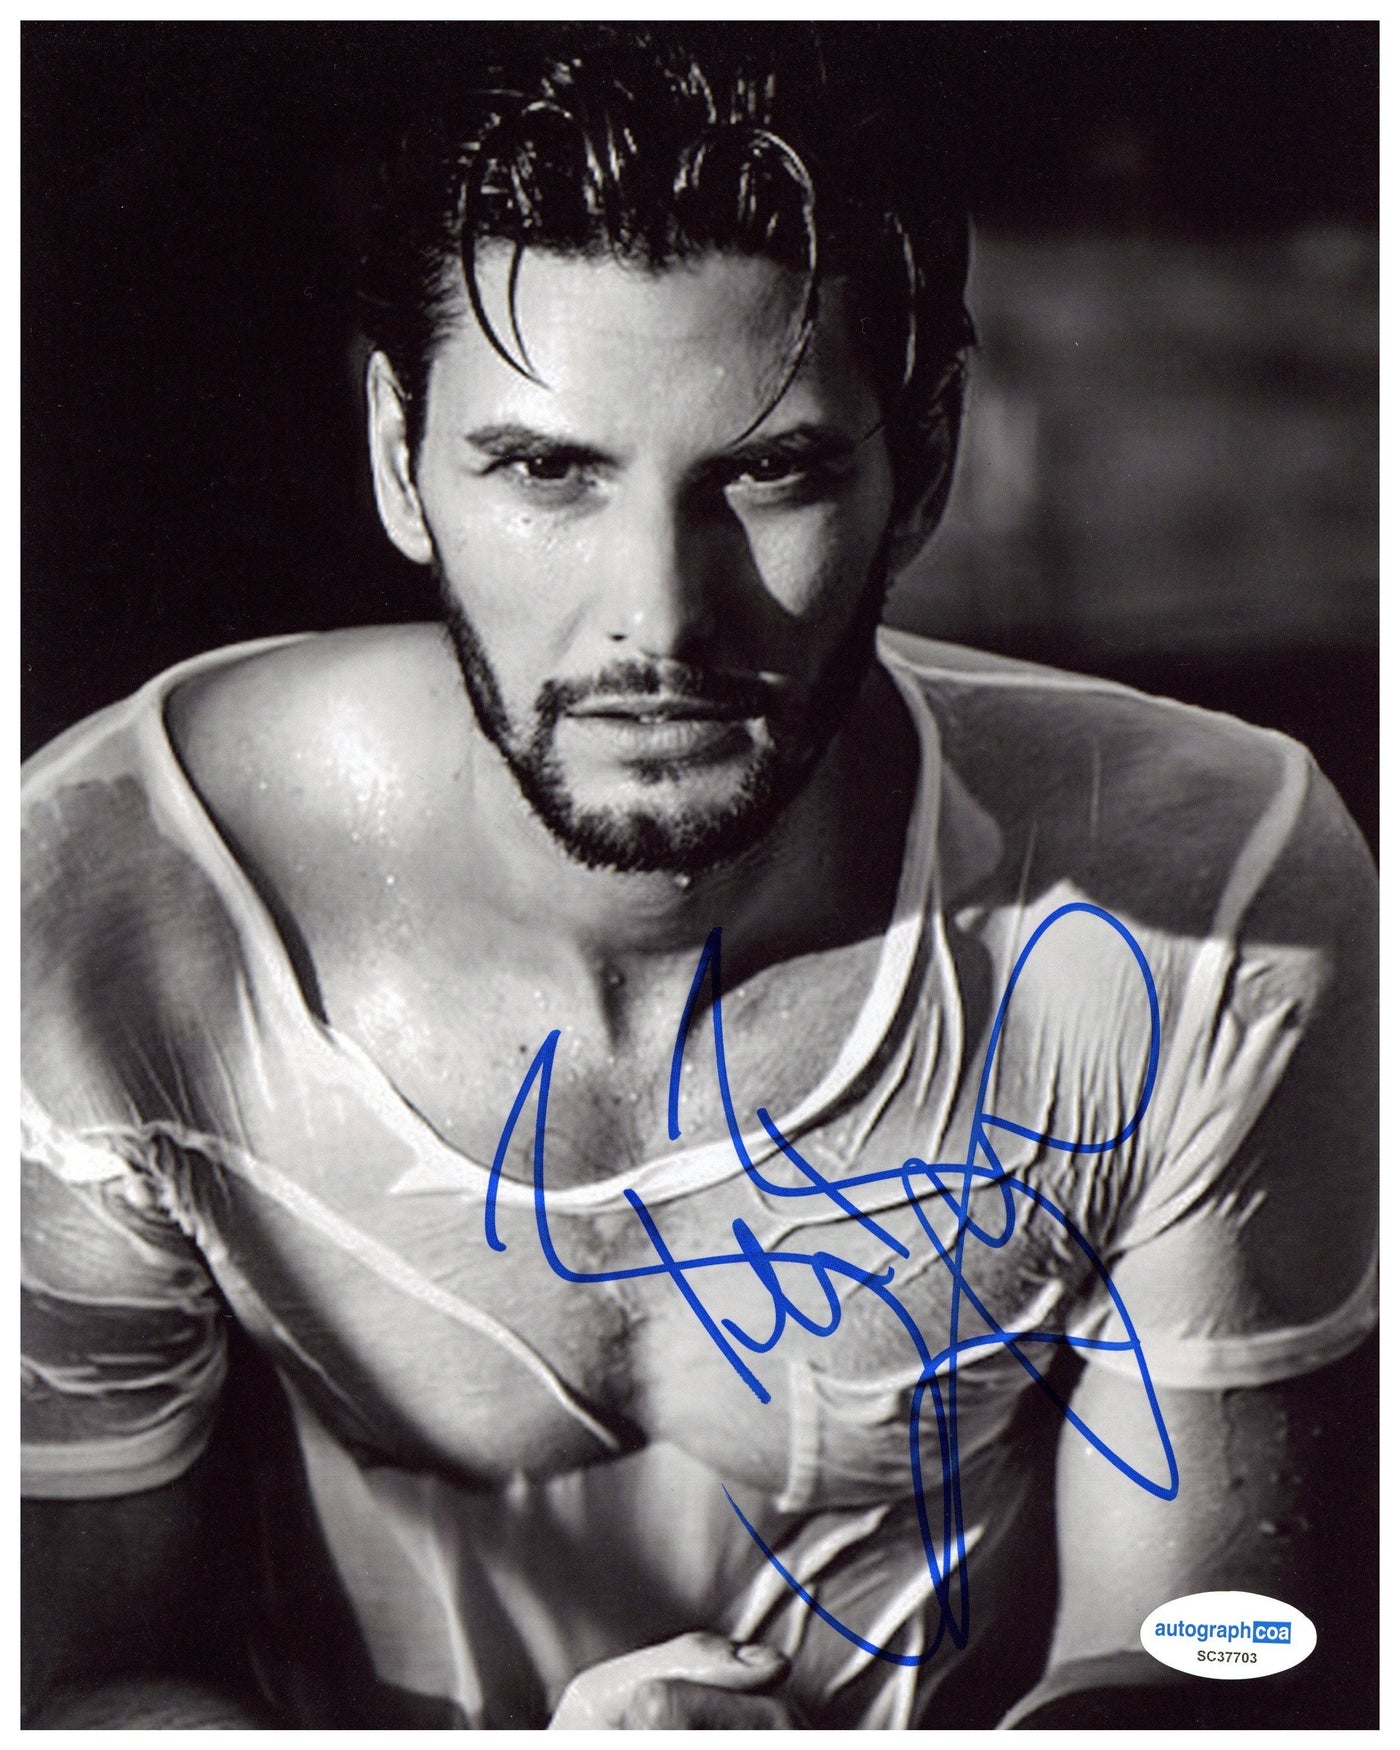 Ben Barnes Signed 8x10 Photo Chronicles of Narnia Autographed ACOA